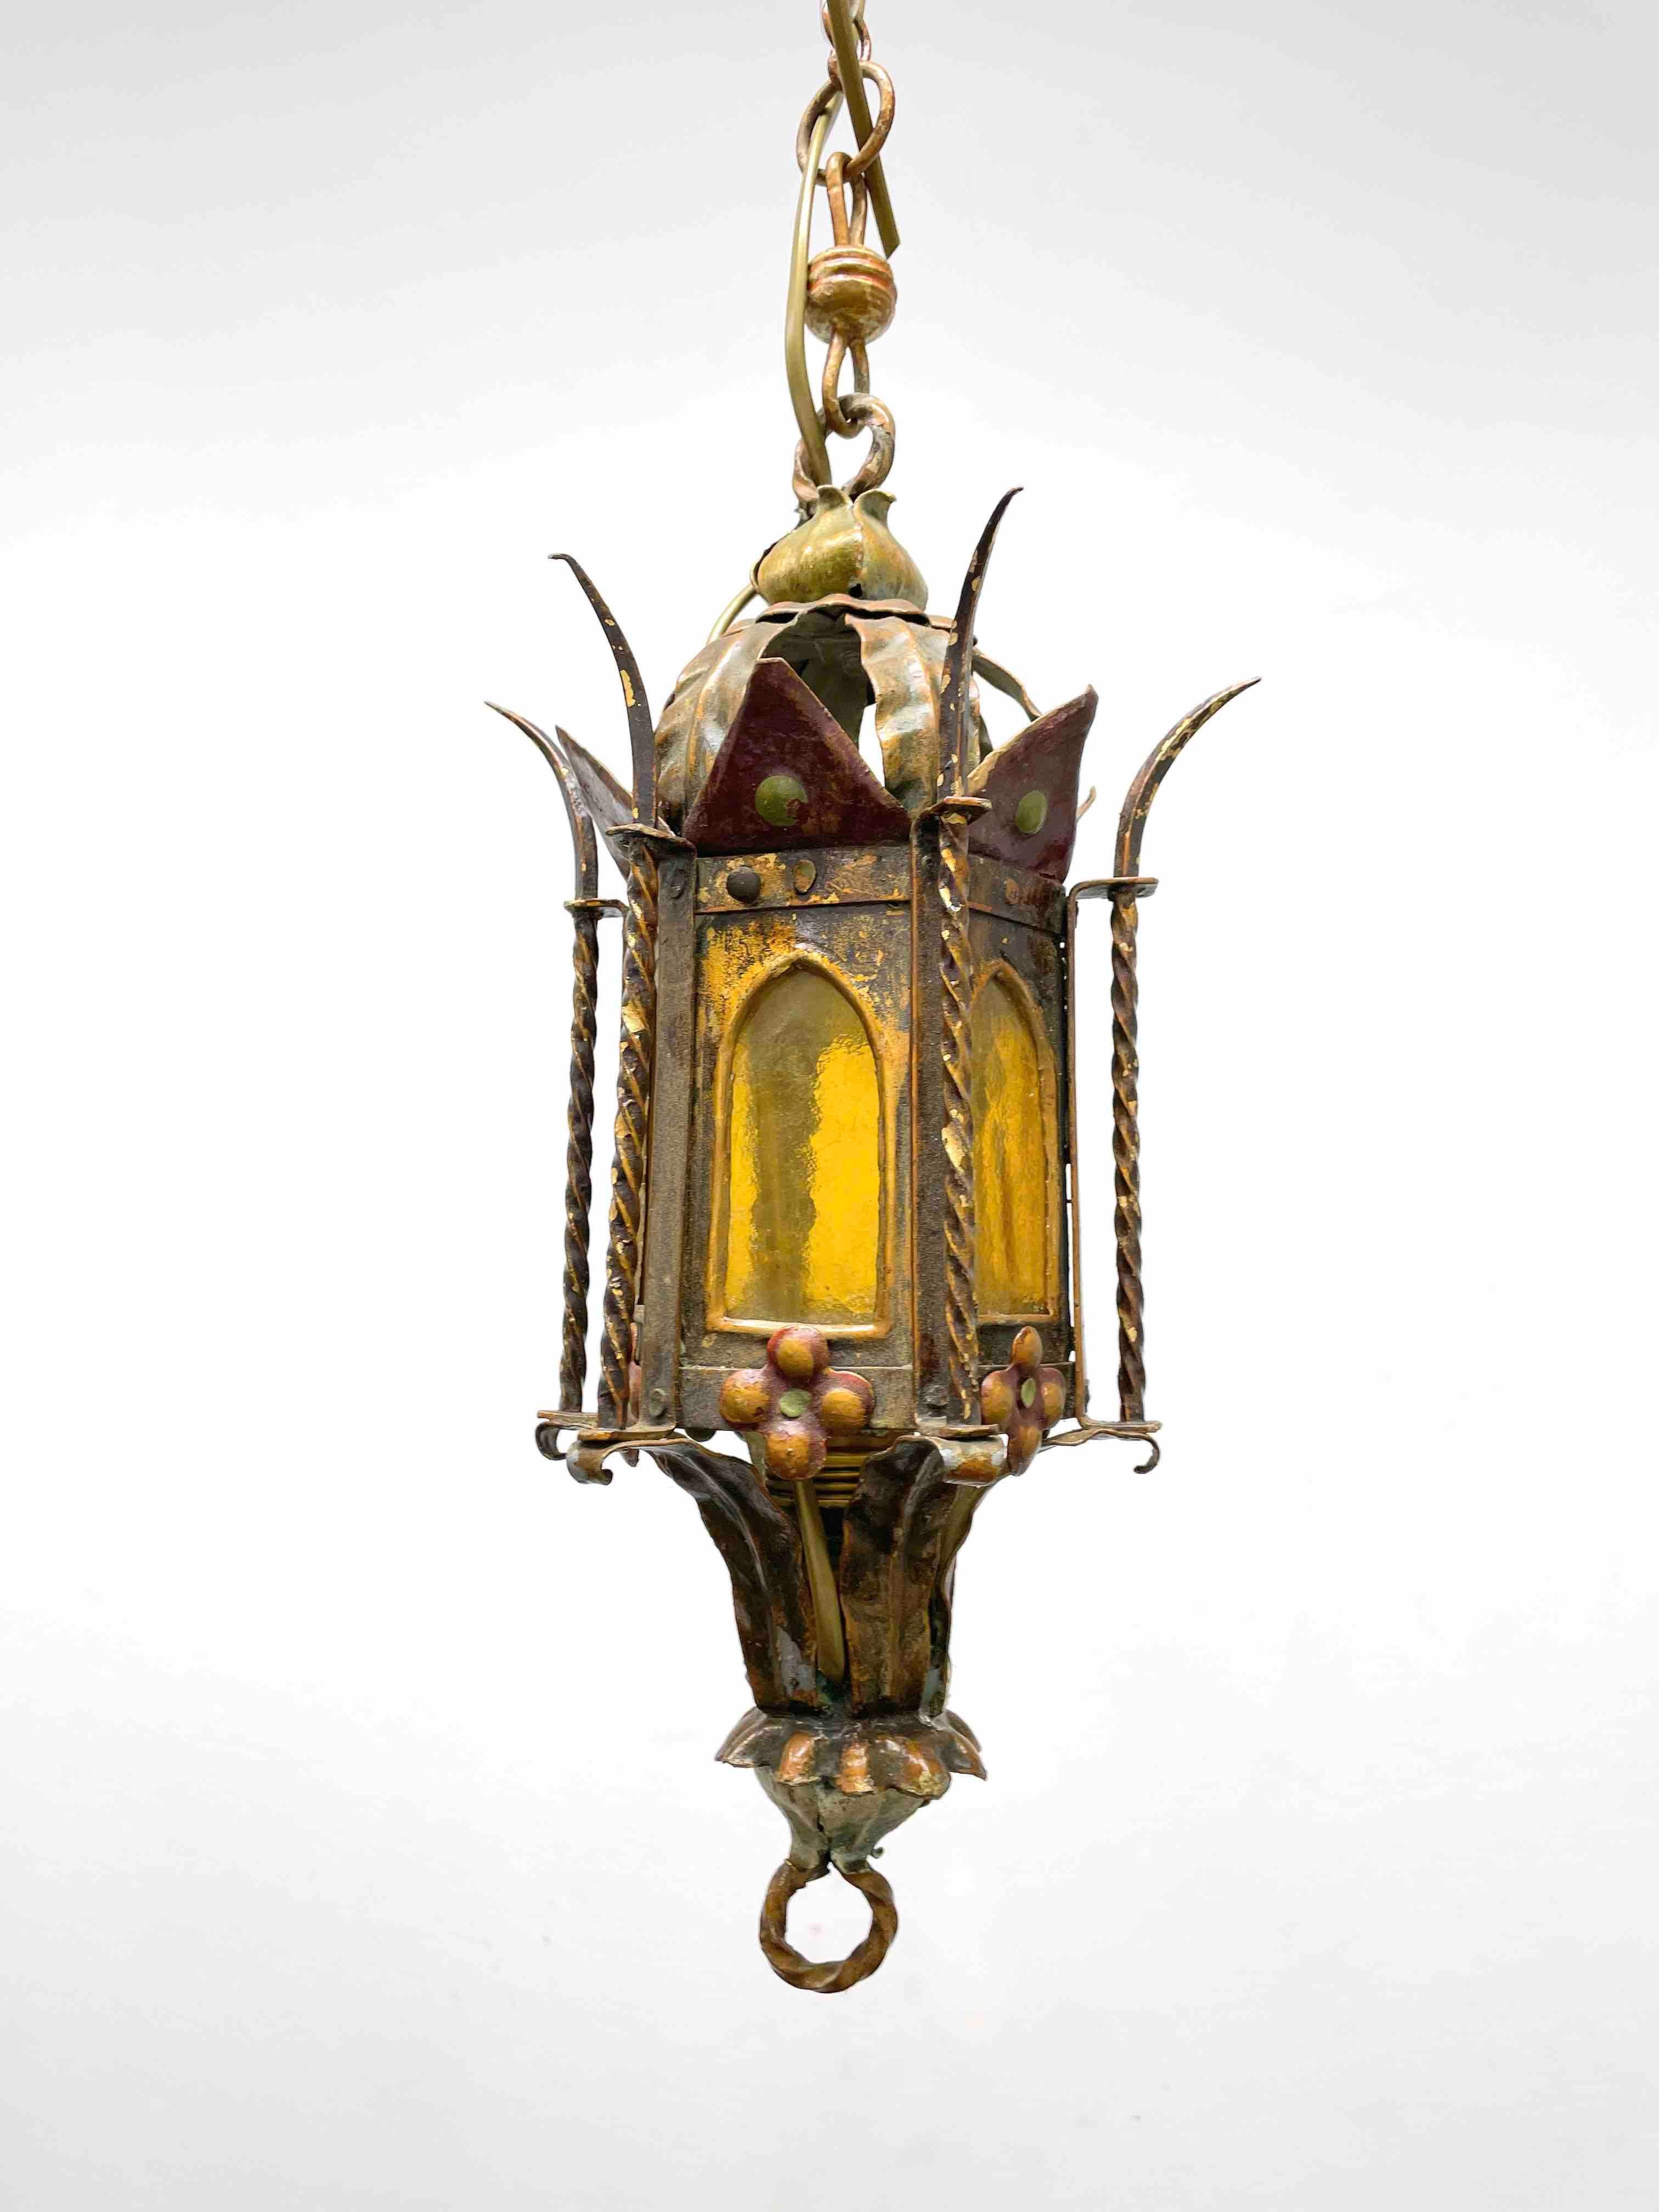 Beautiful Spanish colonial style Lantern Pendant. Nice addition to every home or House. This light fixture remains in very good vintage condition with wear to the glass and some patina to the frame. The Fixture requires one European E27 / 110 Volt